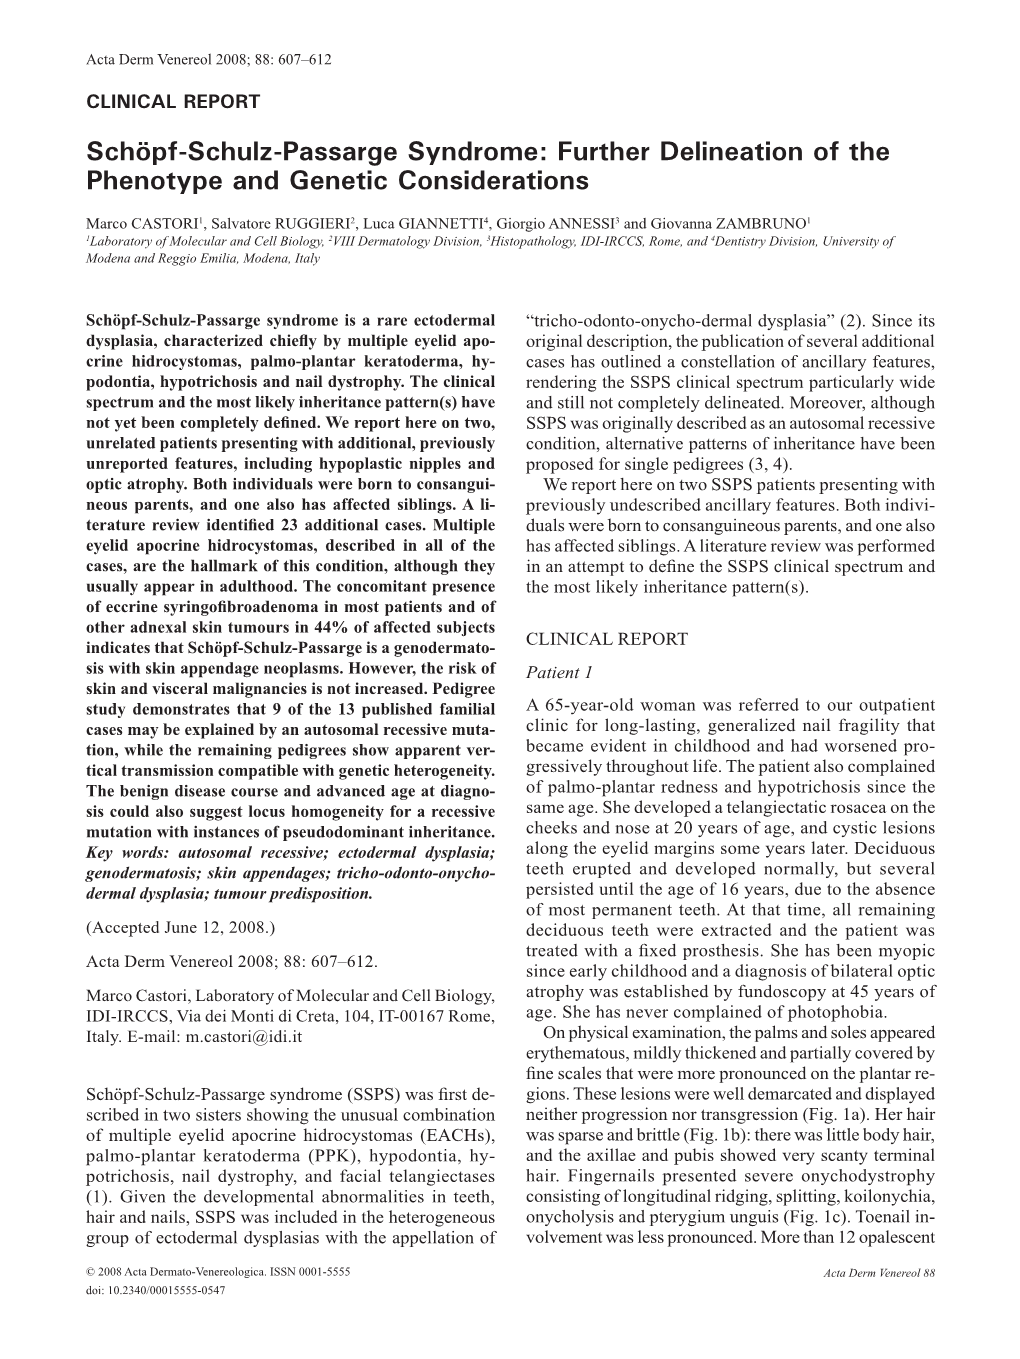 Schöpf-Schulz-Passarge Syndrome: Further Delineation of the Phenotype and Genetic Considerations